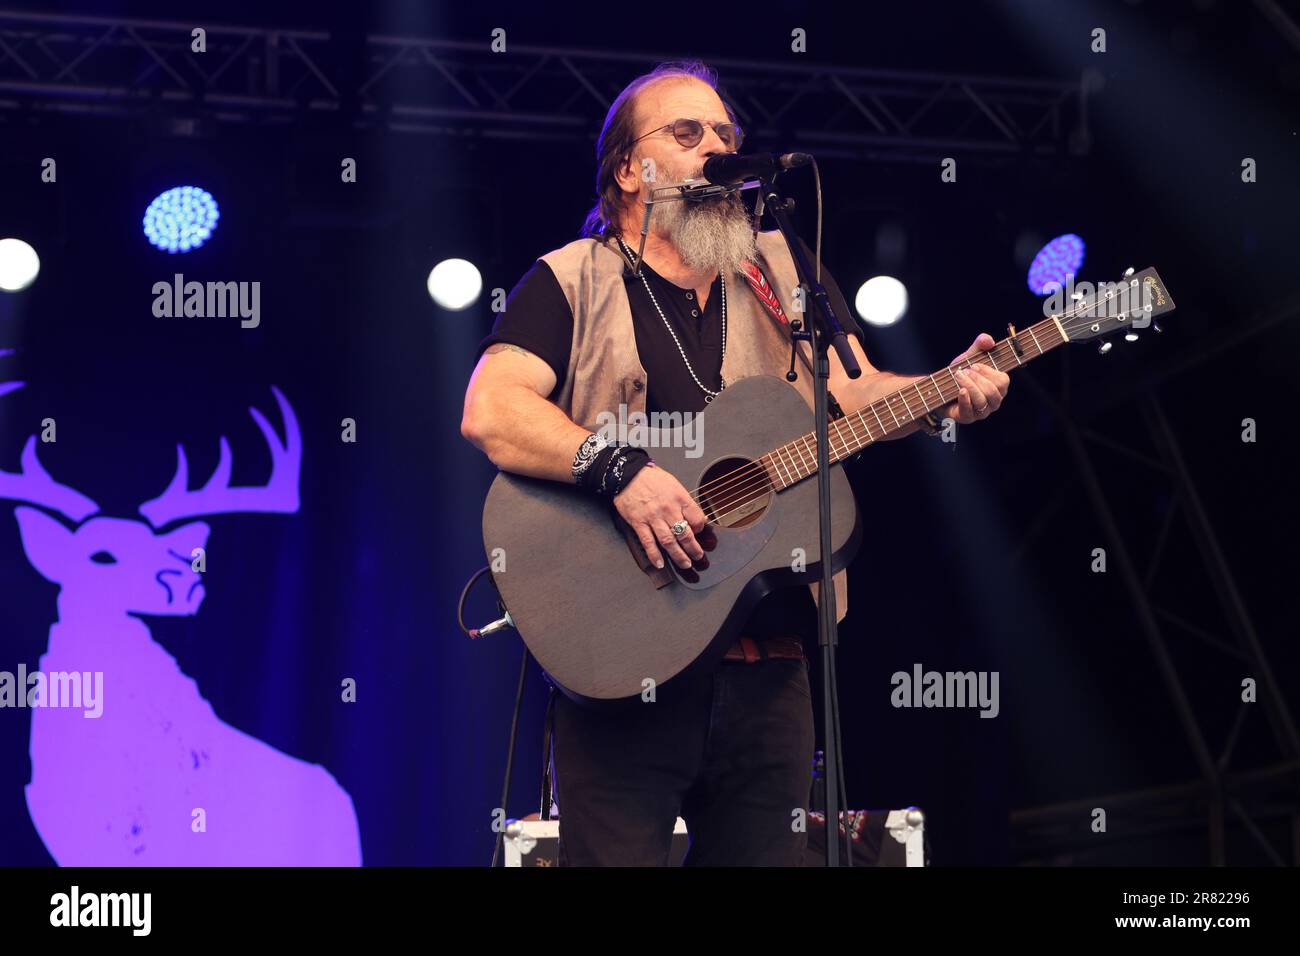 Black Deer Festival, Kent, UK - 18th June Steve Earle performs a solo acoustic set in the rain on the main stage at Black Deer Festival, Eridge Park, Kent. Credit Jill O'Donnell/Alamy Live News Stock Photo